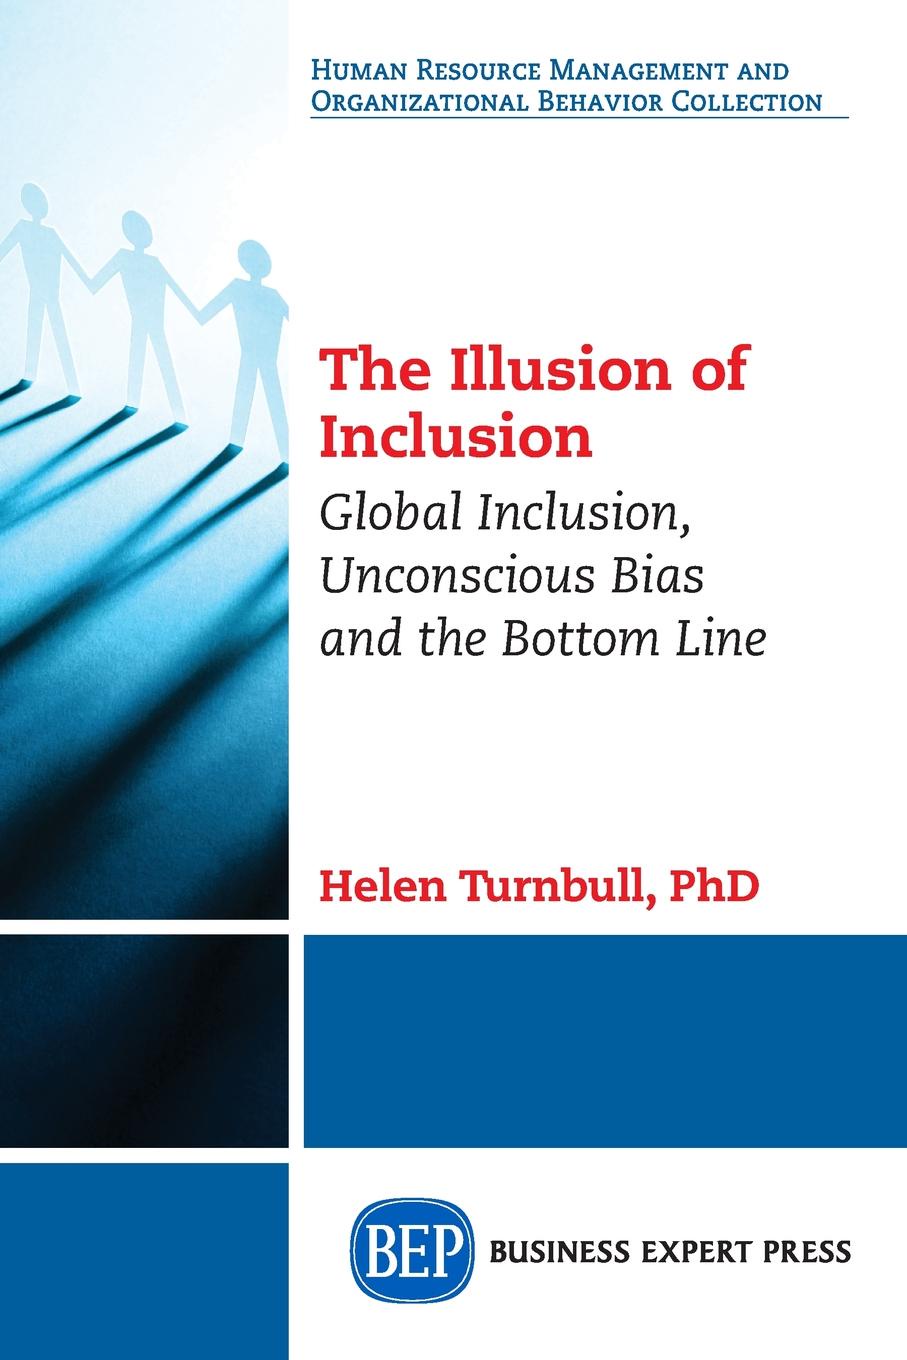 фото The Illusion of Inclusion. Global Inclusion, Unconscious Bias, and the Bottom Line